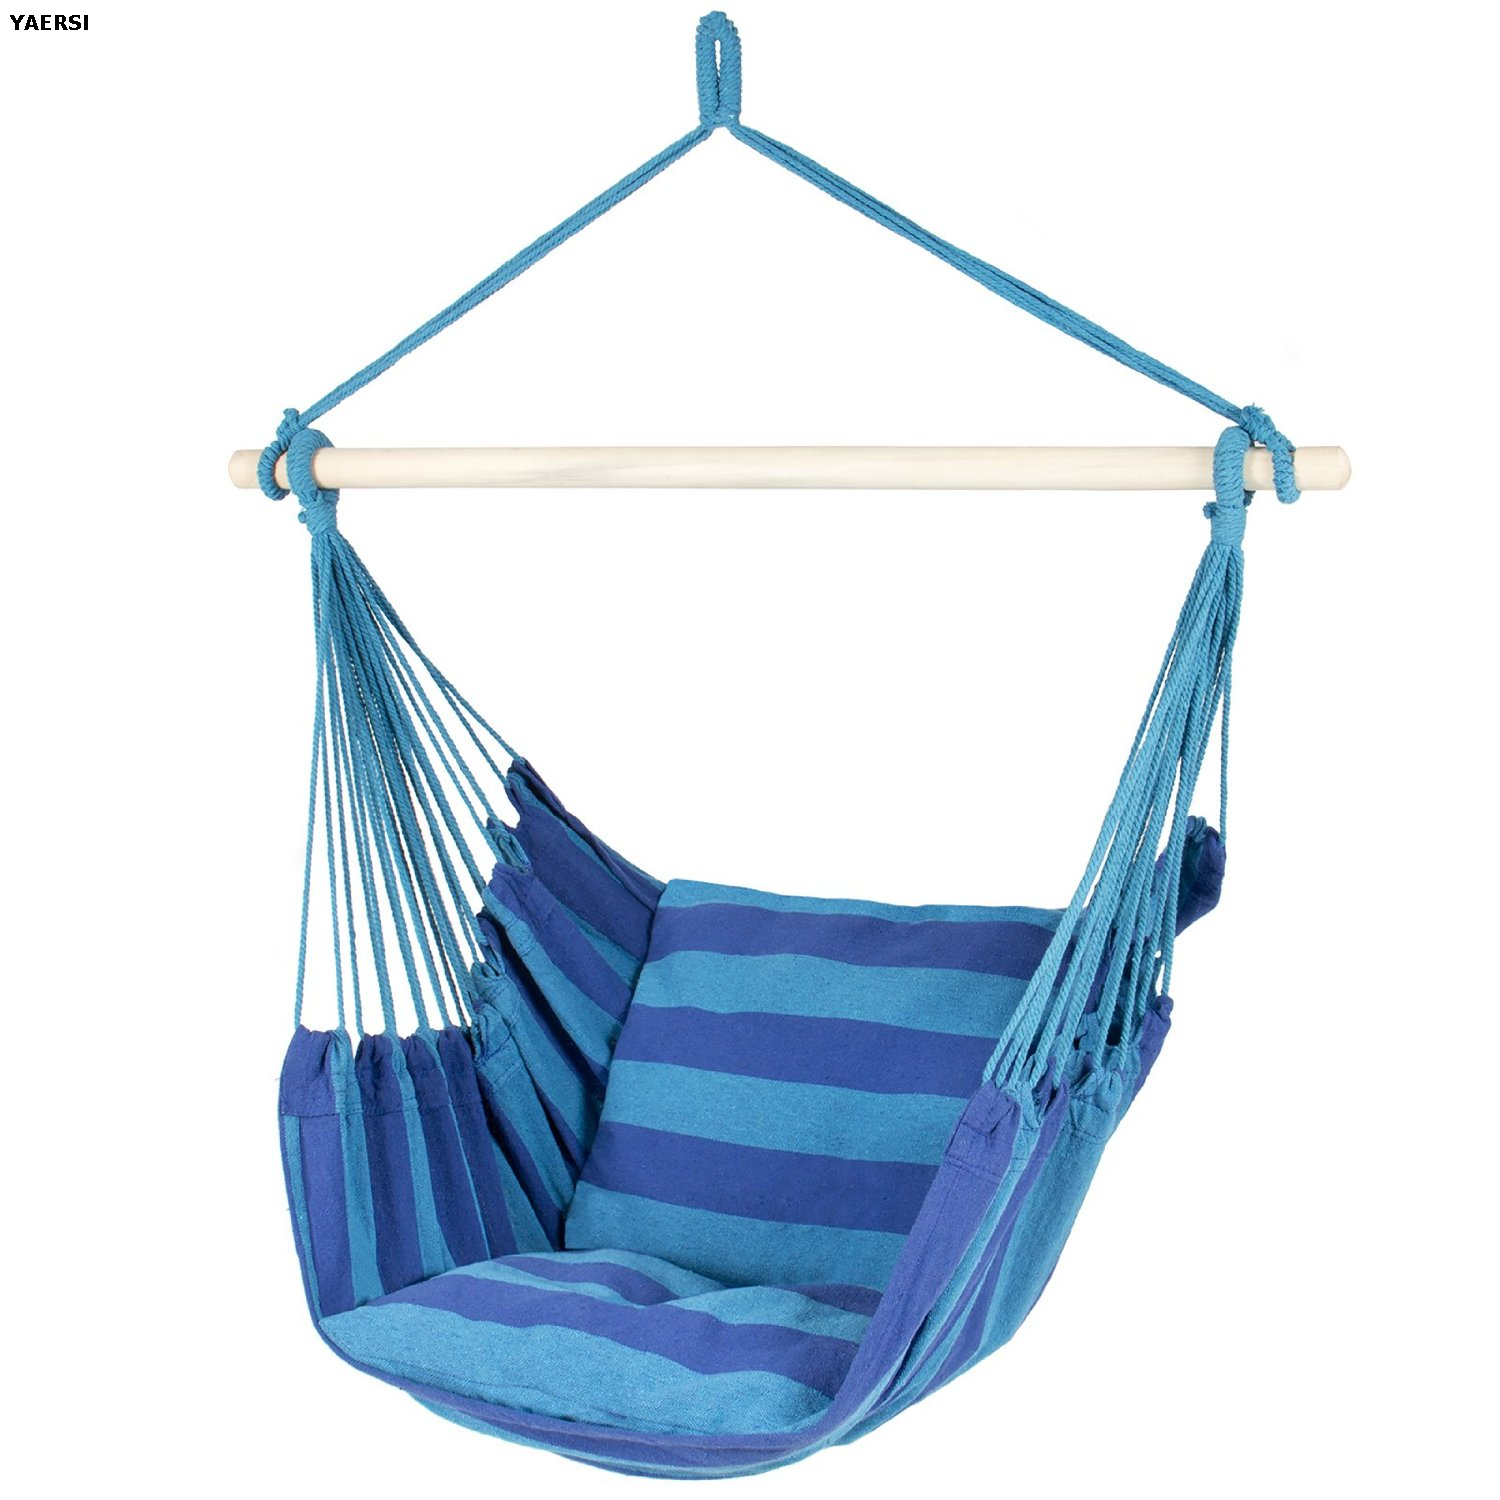 Hanging Hammock Swing with Two Cushions for Indoor And Outdoor